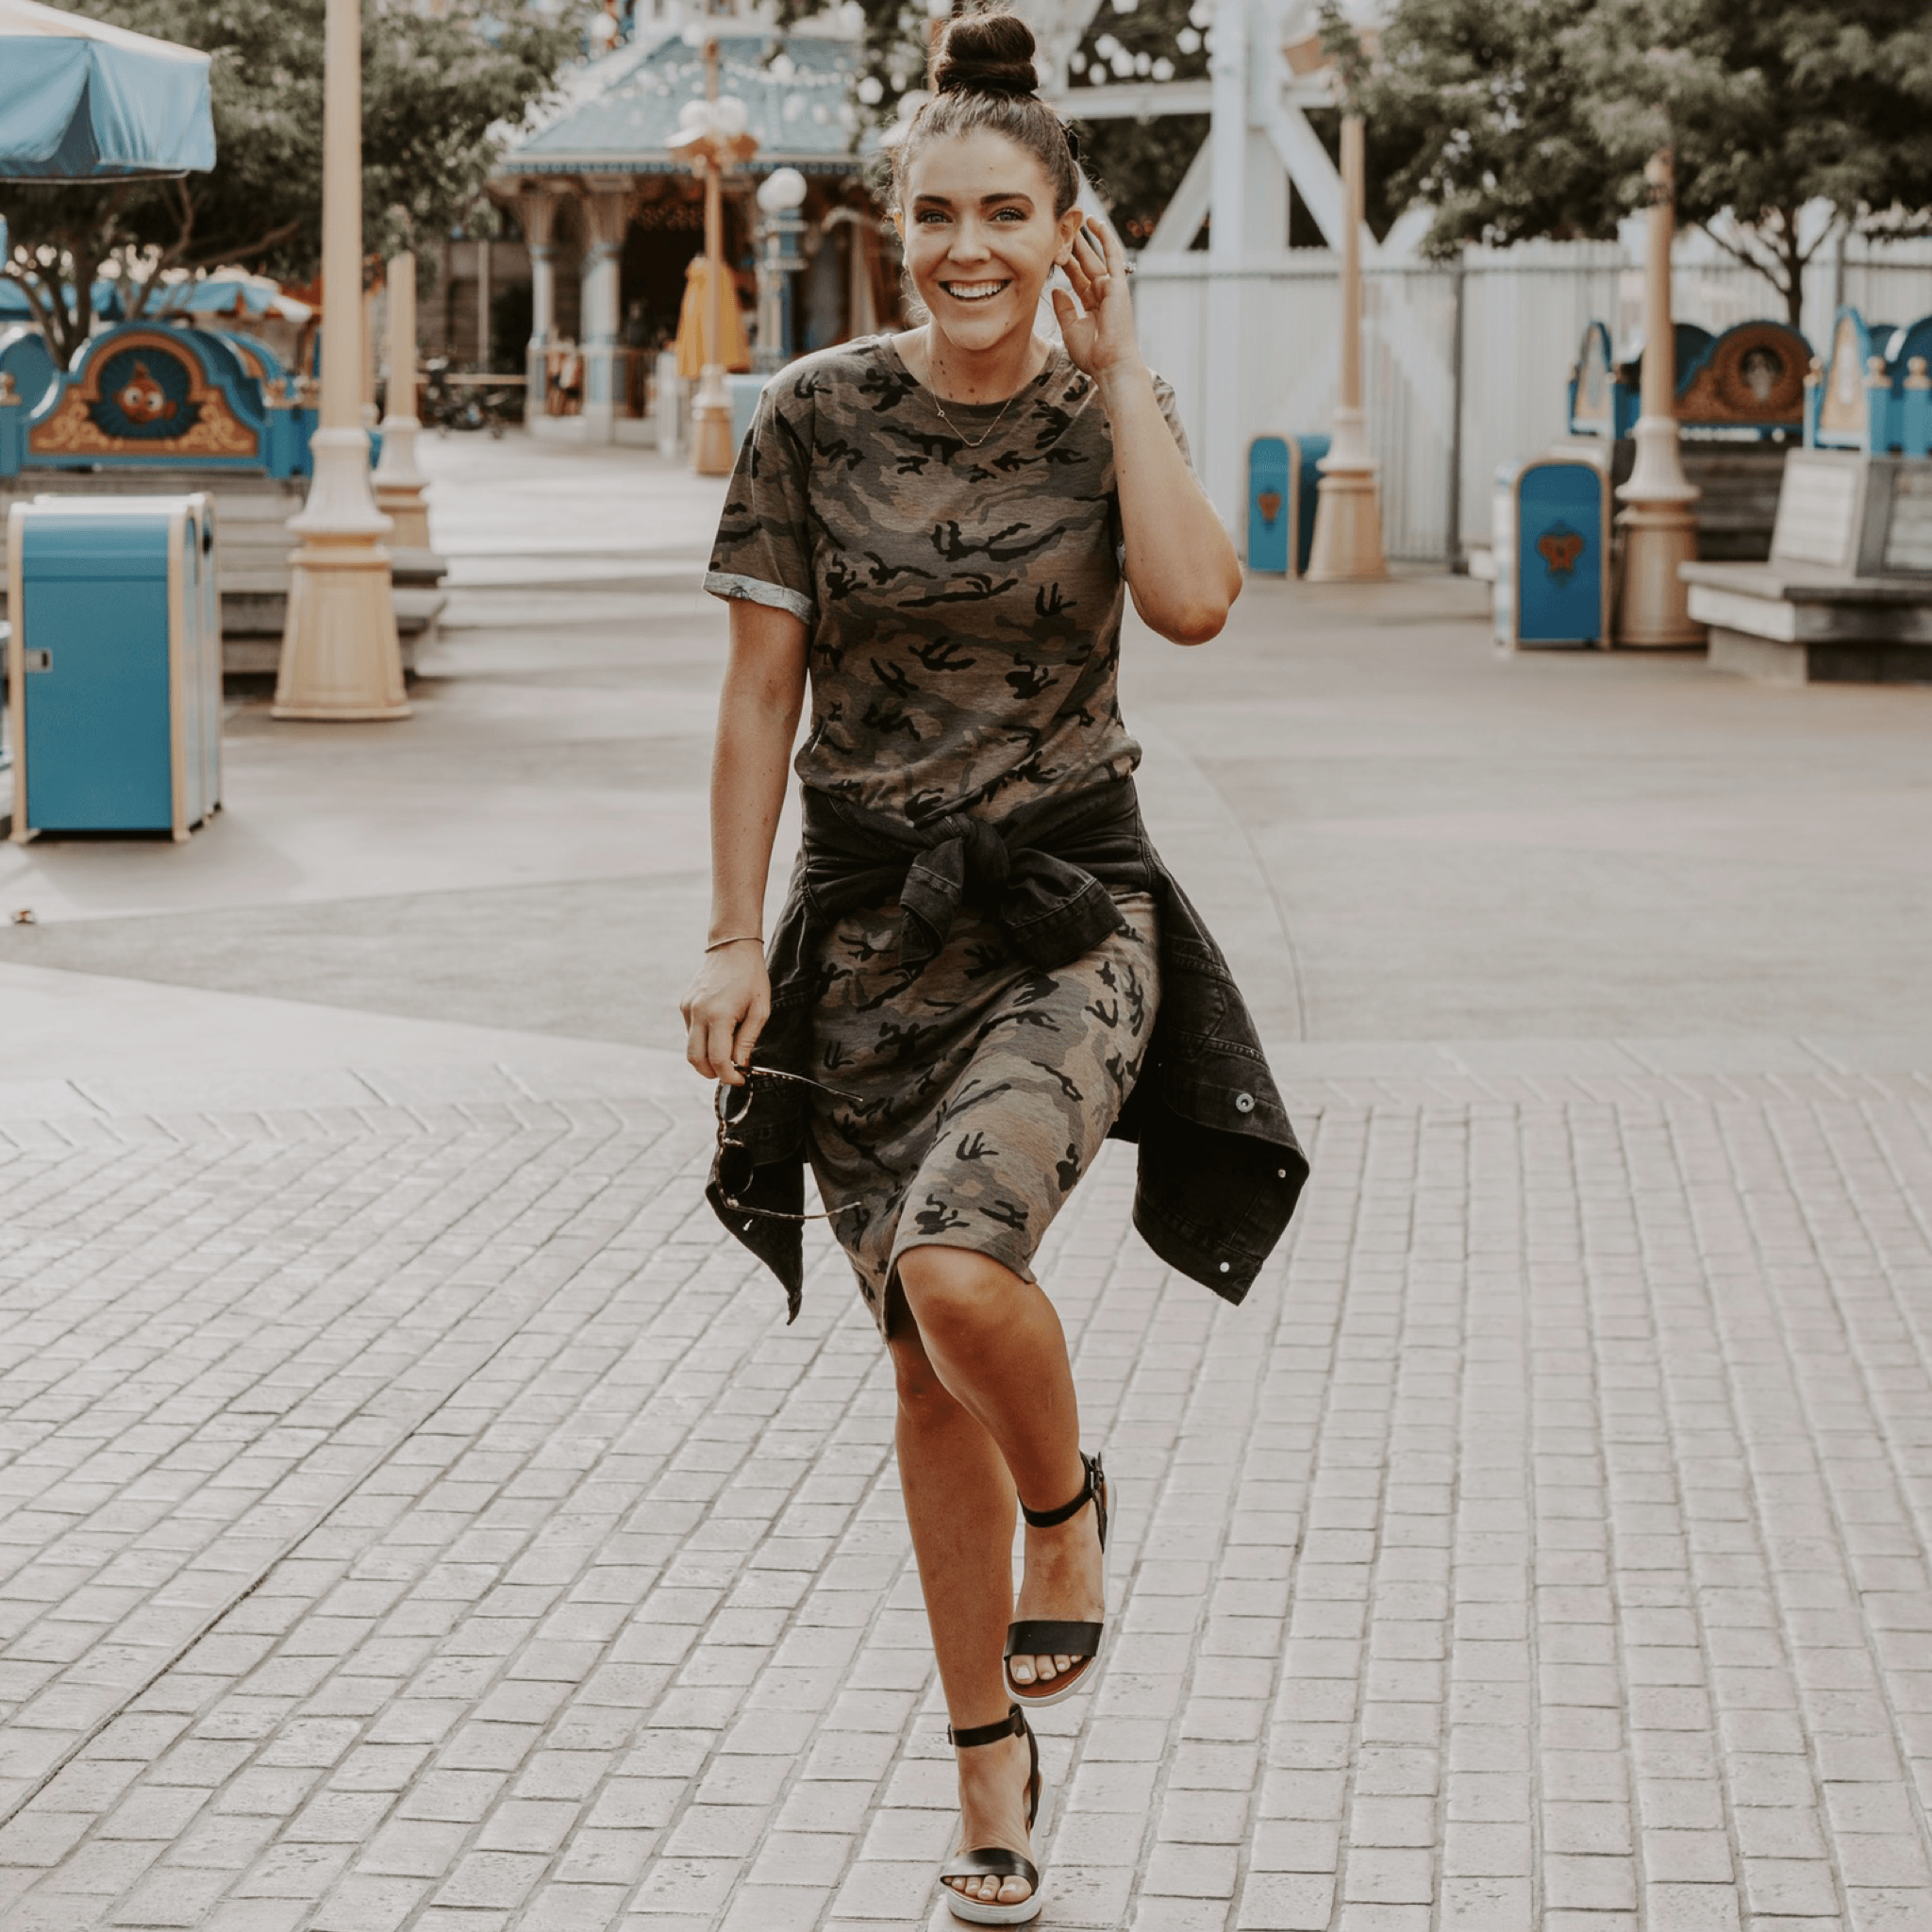 Melanie's Outfit Guide to Disneyland